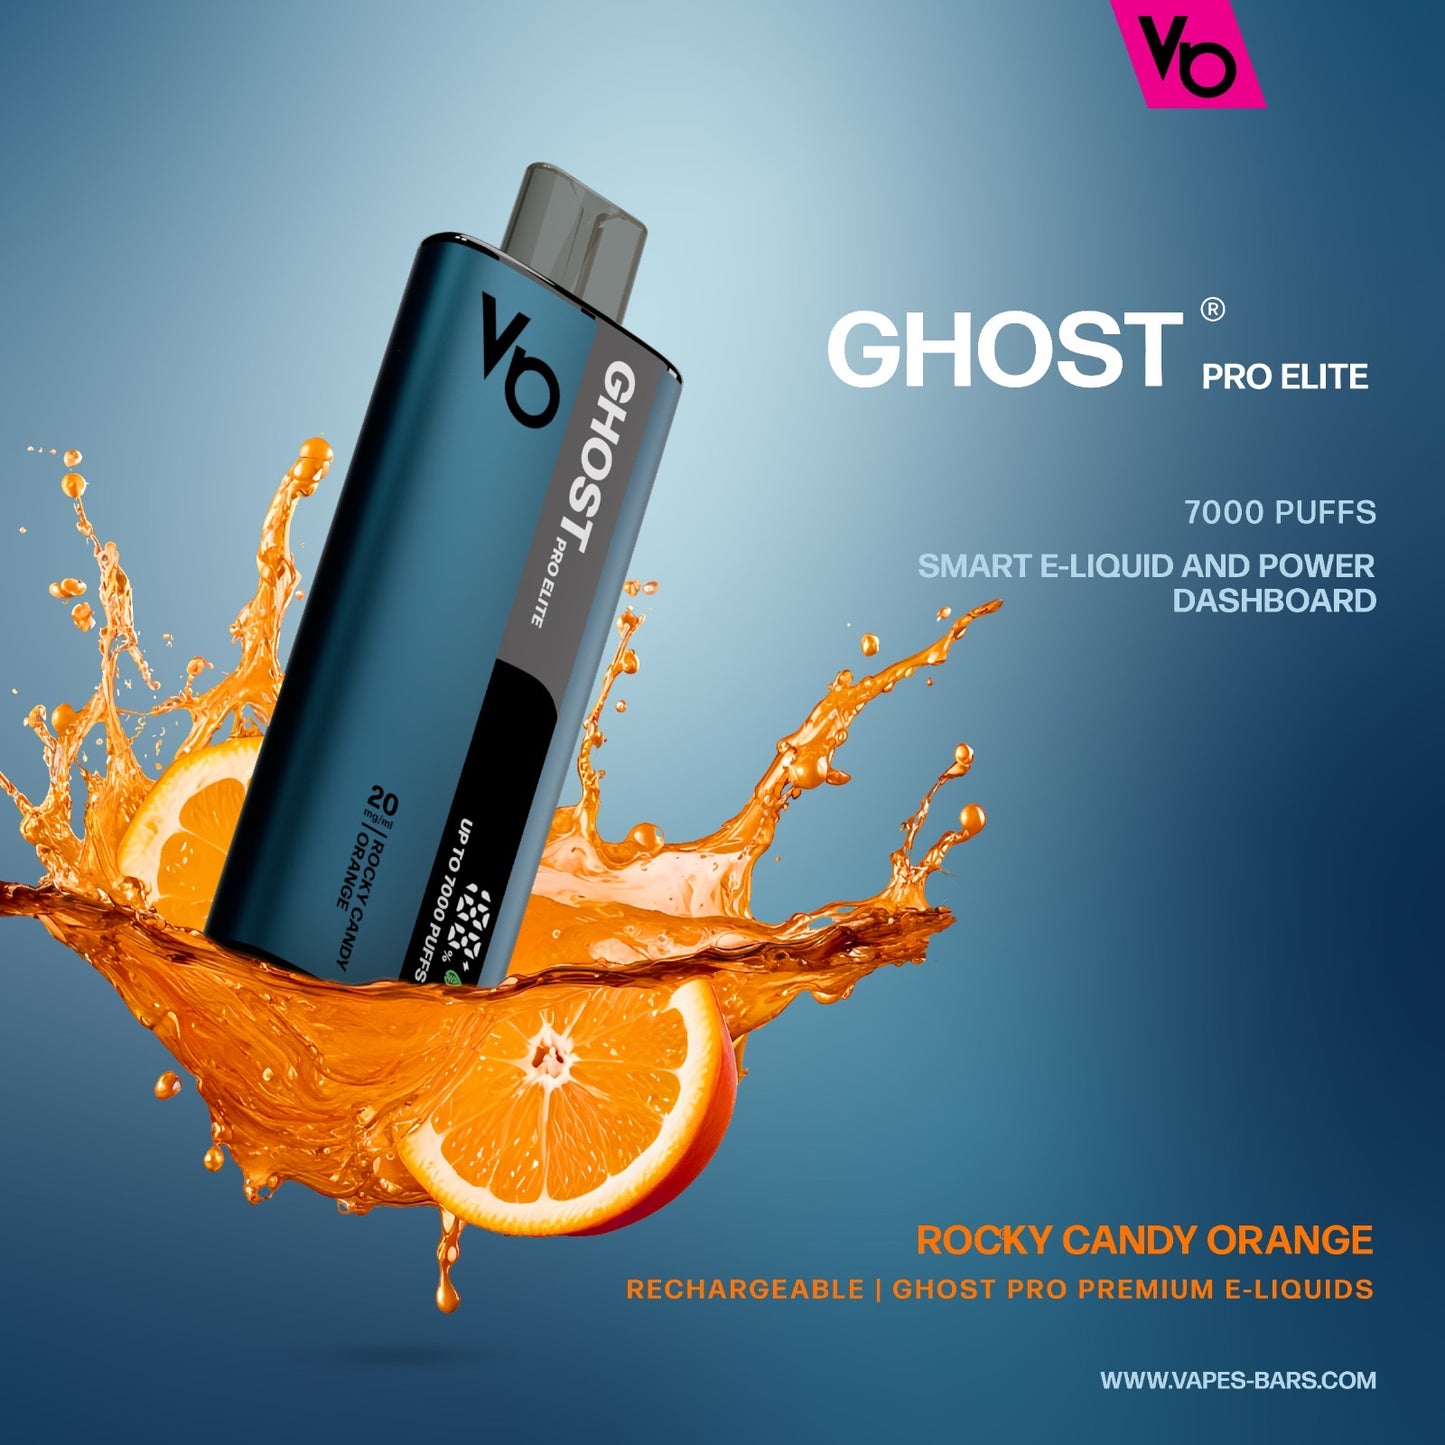 Vape Bars - Ghost Pro Elite 7000 Puffs Disposable -  (20mg)